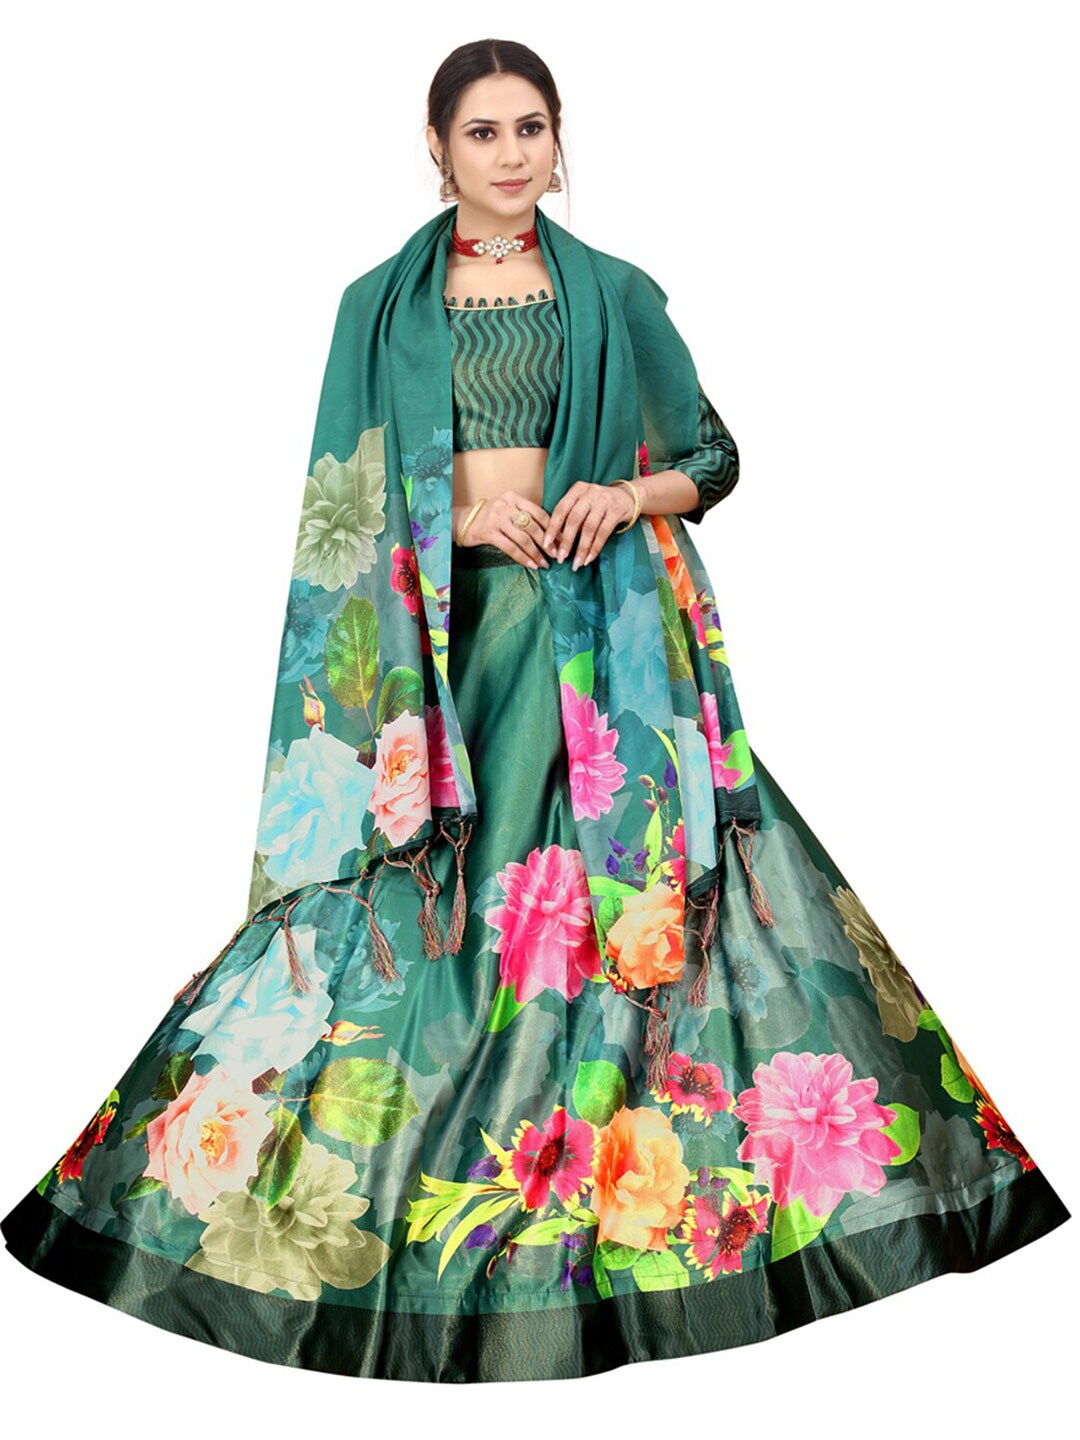 Xenilla Green & Pink Embroidered Semi-Stitched Lehenga & Blouse With Dupatta Price in India